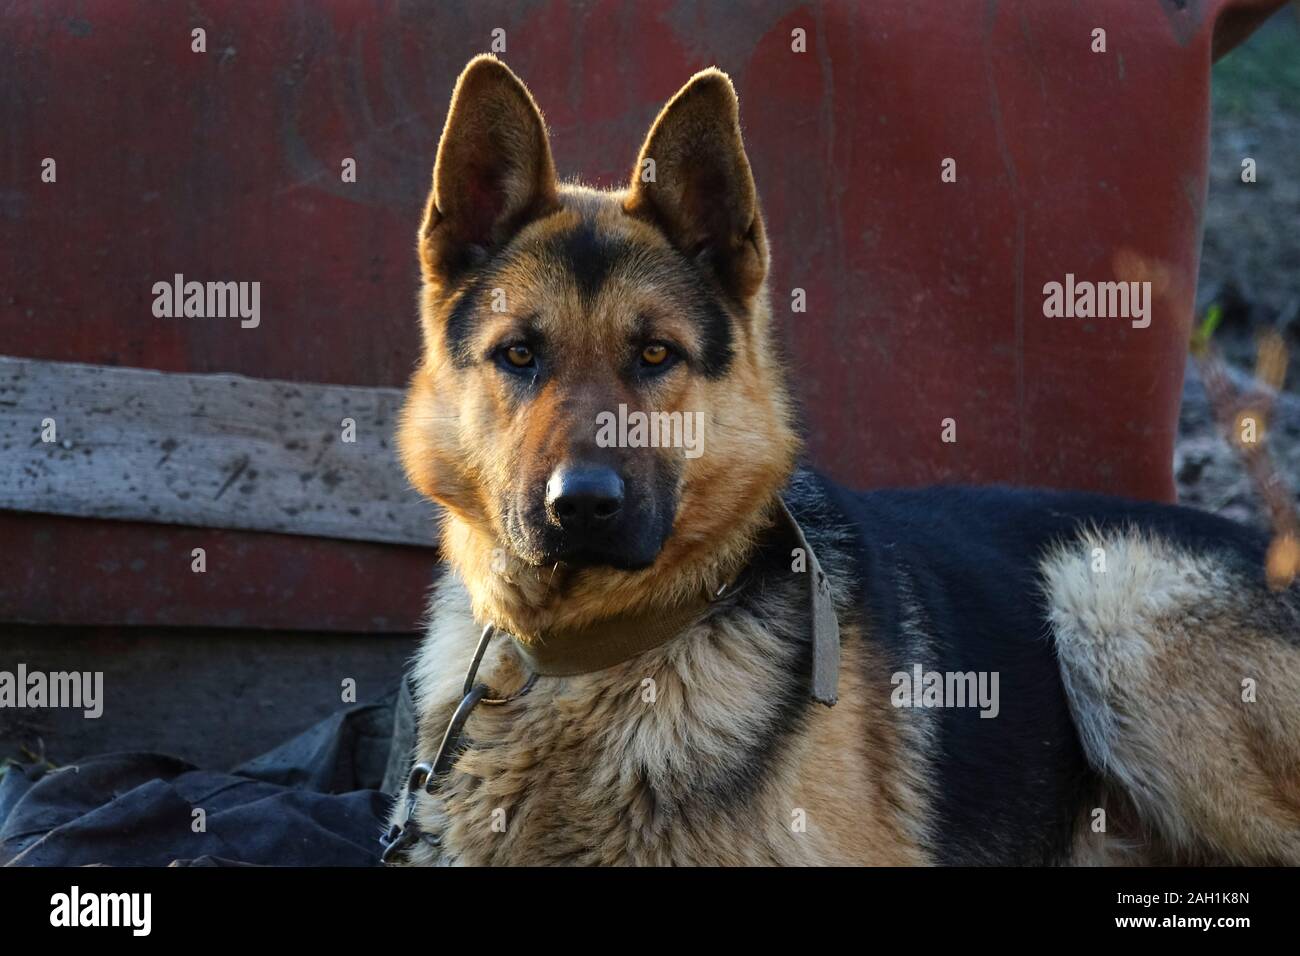 Page 3 - Brown Sheepdog High Resolution Stock Photography and Images - Alamy